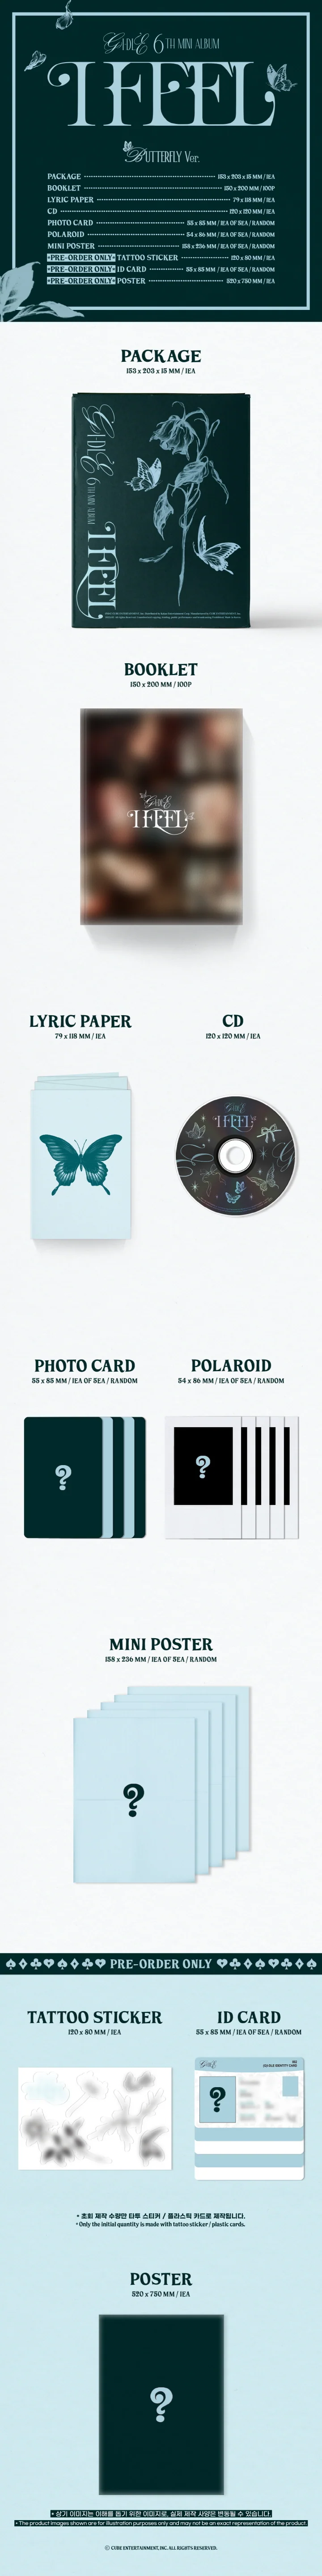 gidle-i-feel-6th-mini-album-butterfly-contents